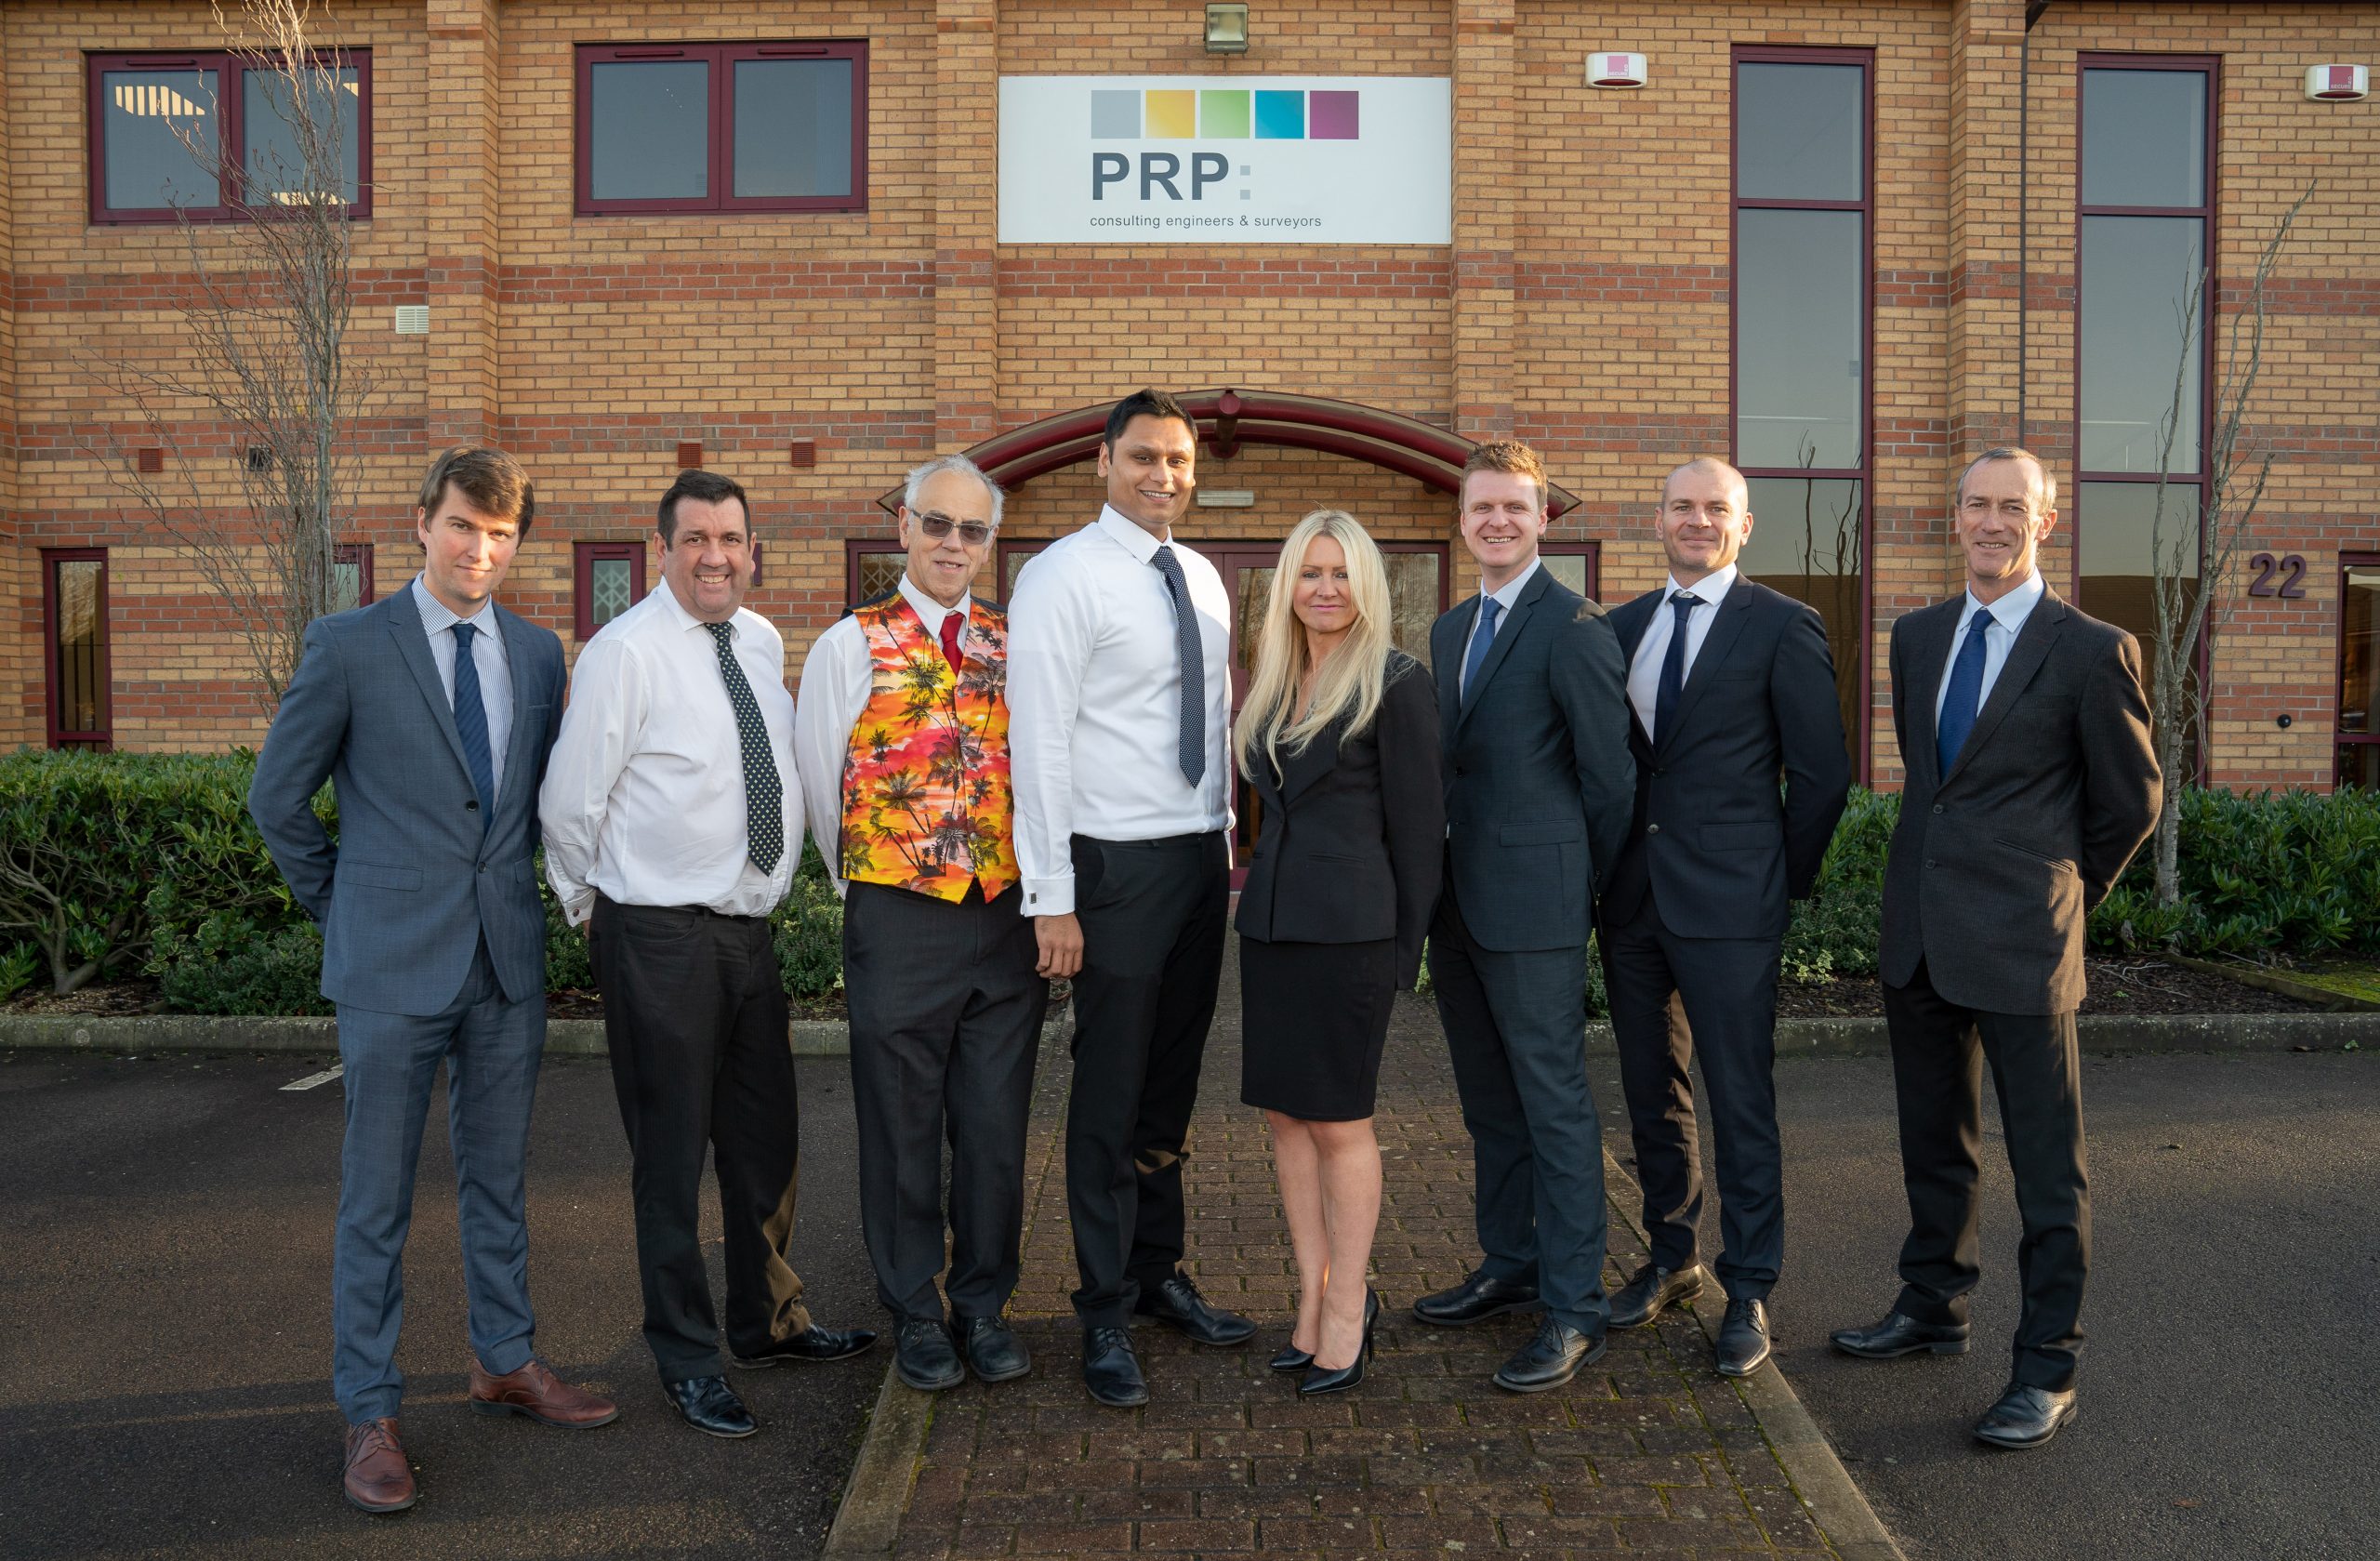 PRP CONSULTING ENGINEERS AND SURVEYORS CELEBRATE 35 YEARS  WITH TWO NEW DIRECTORS